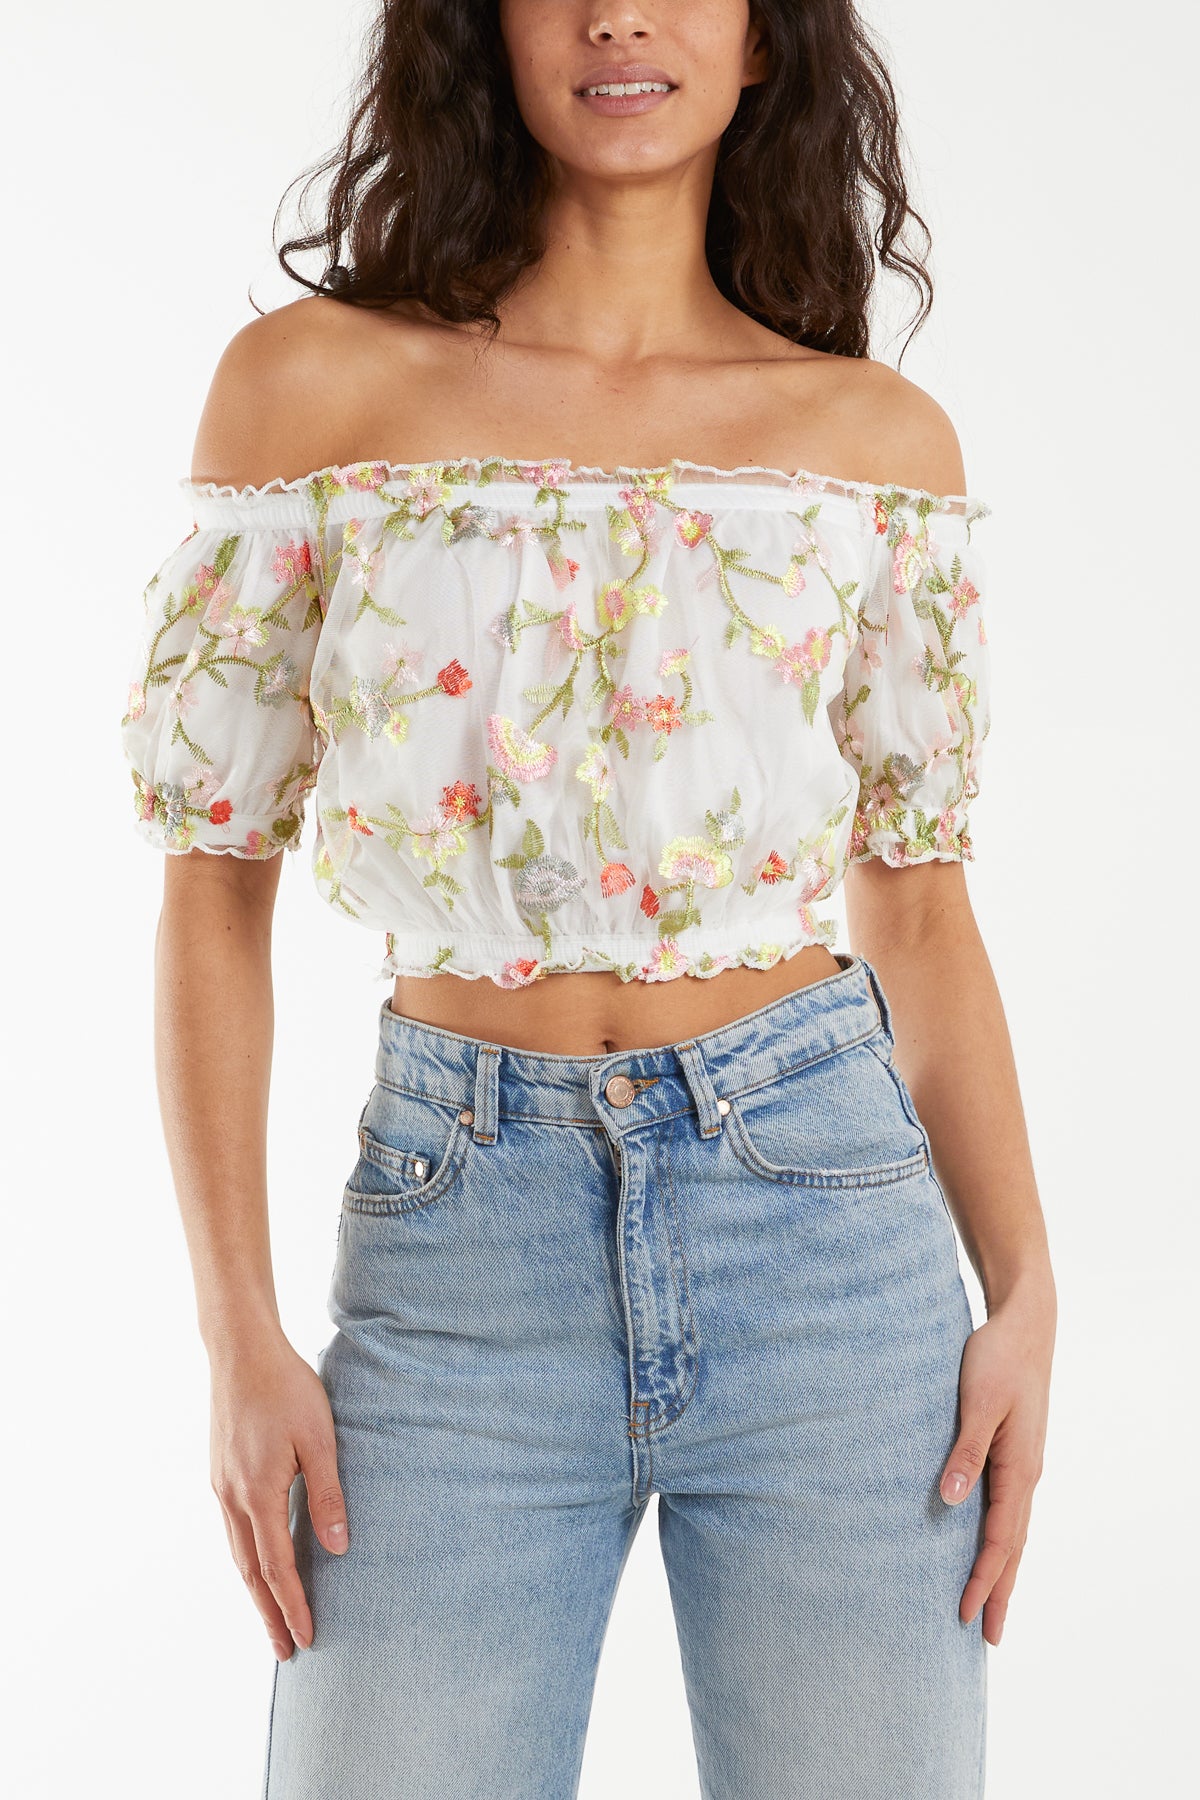 Floral Embroidery Mesh Bardot Crop Top